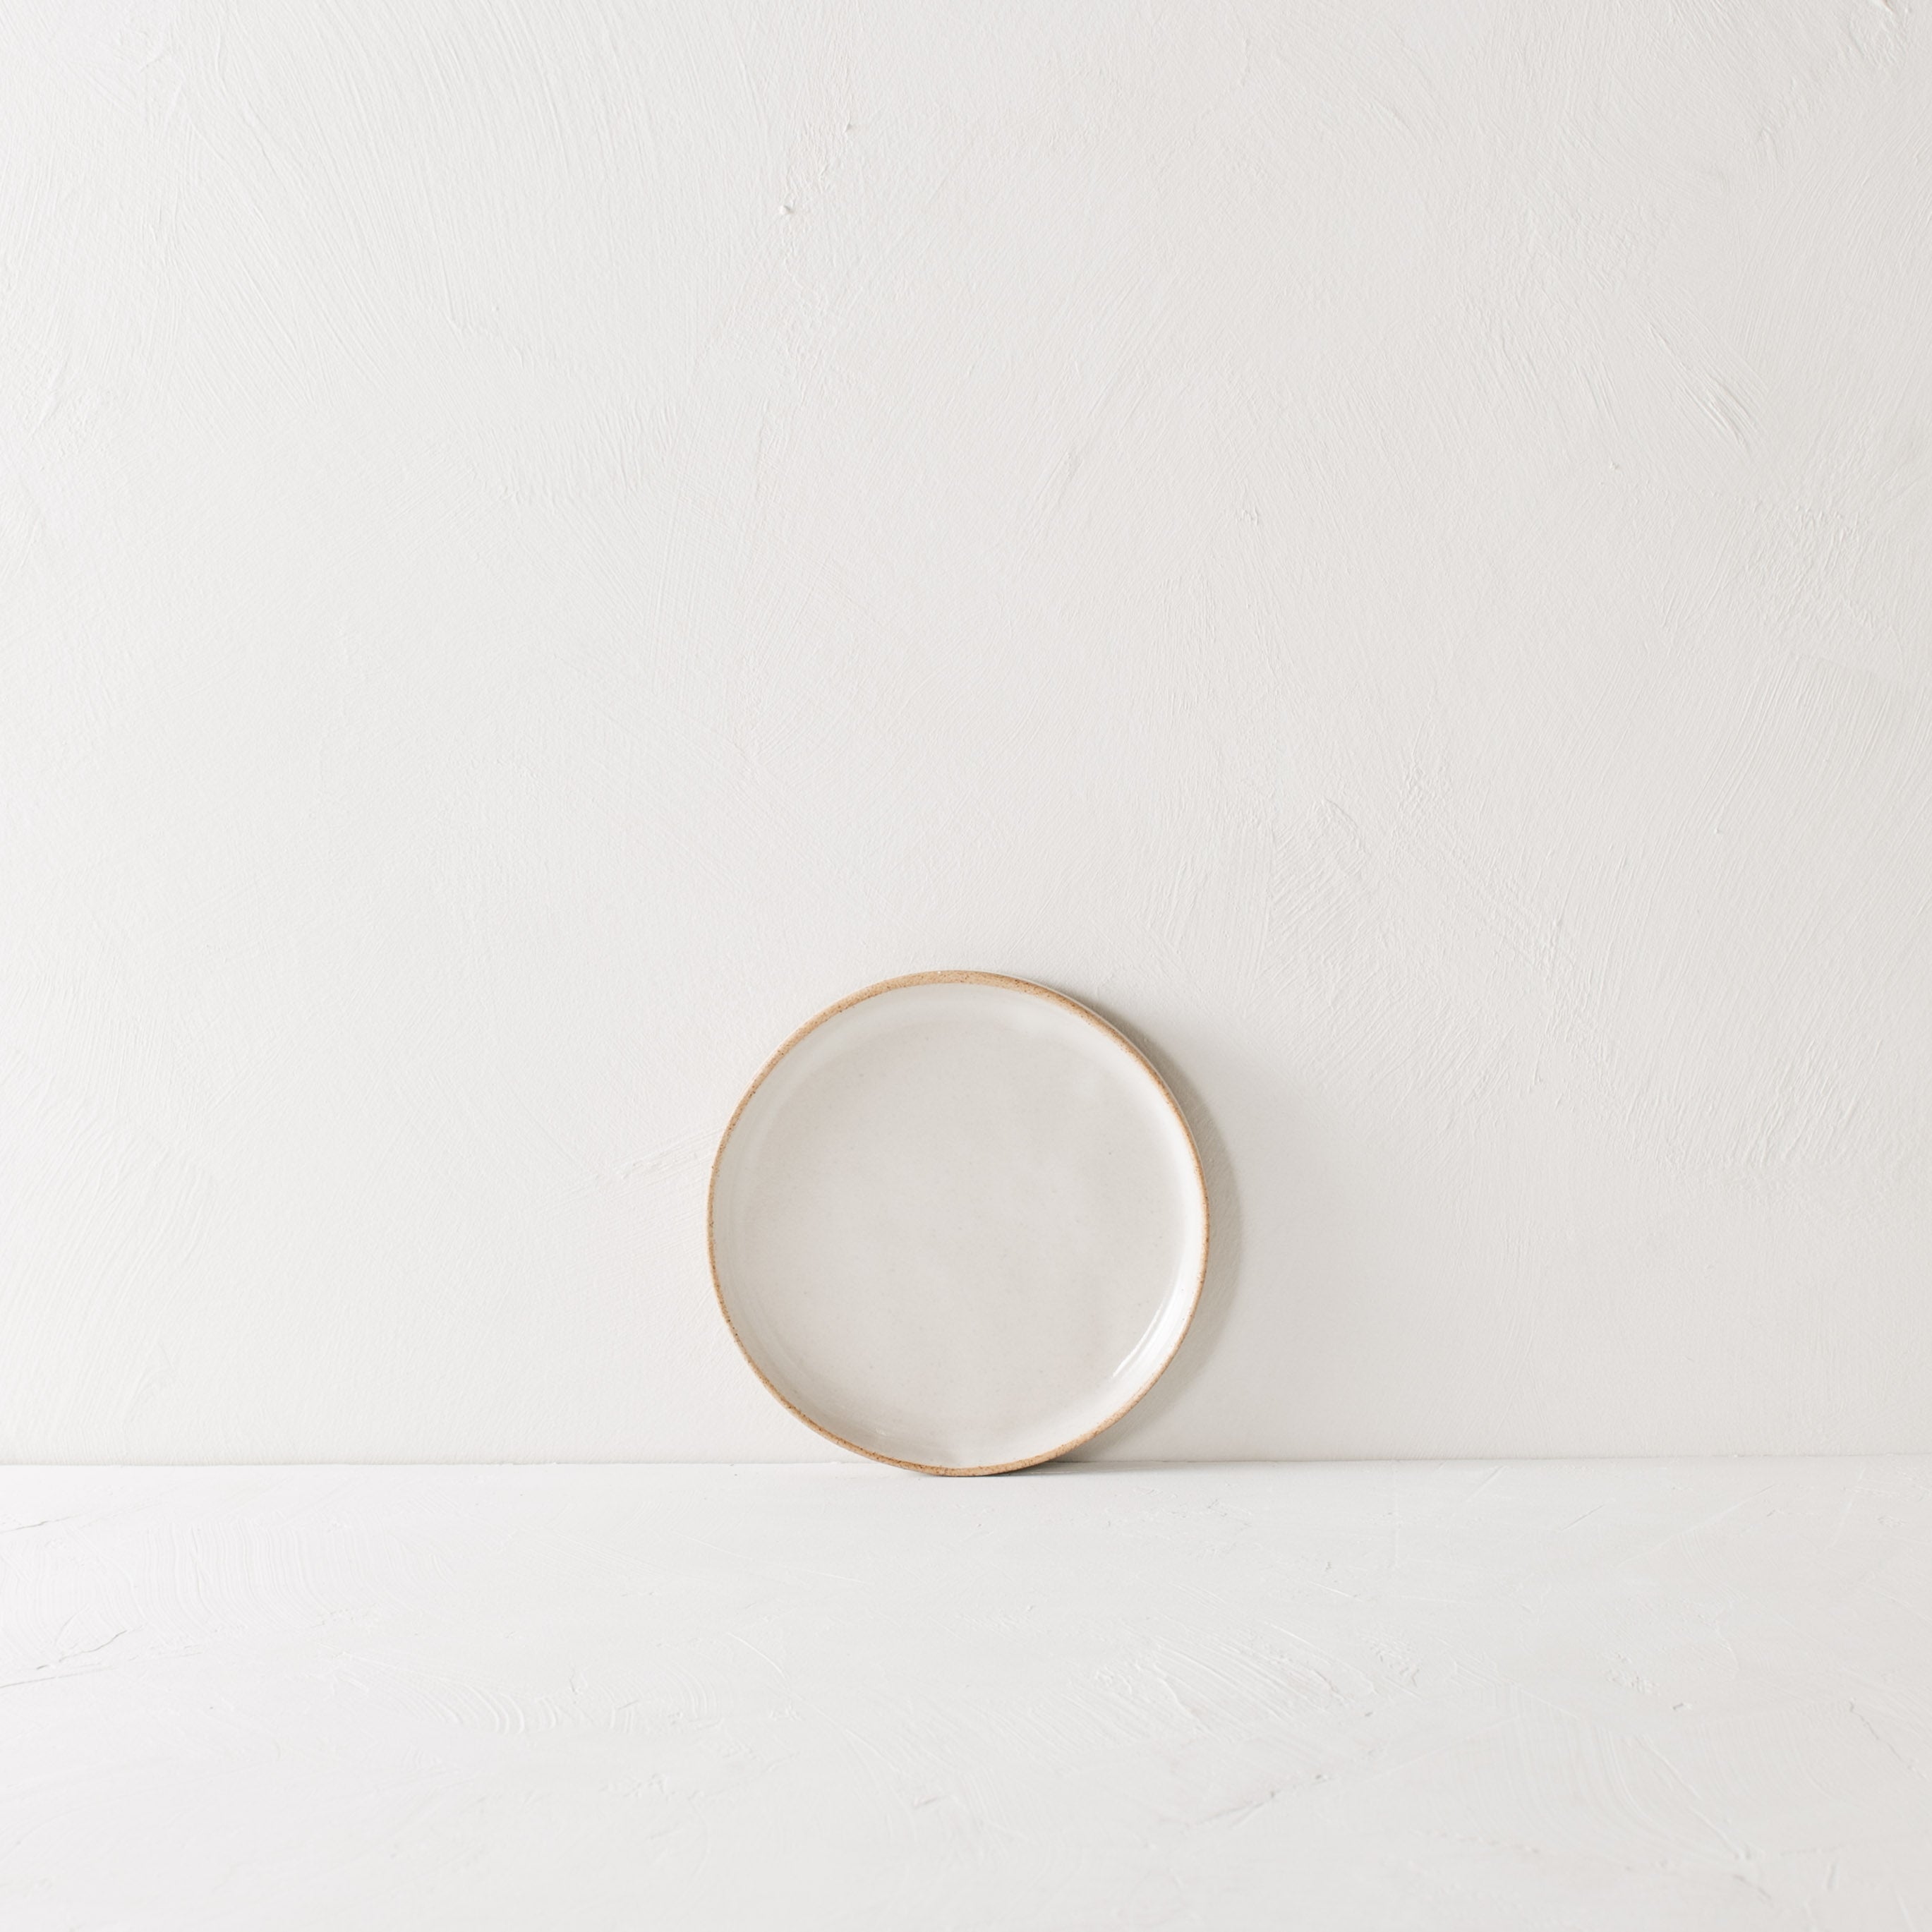 Minimal white 6 inch side dish leaning against the backdrop. Exposed stoneware rim can be seen. Handmade ceramic 6 inch side dish, designed and sold by Convivial Production, Kansas City ceramics.